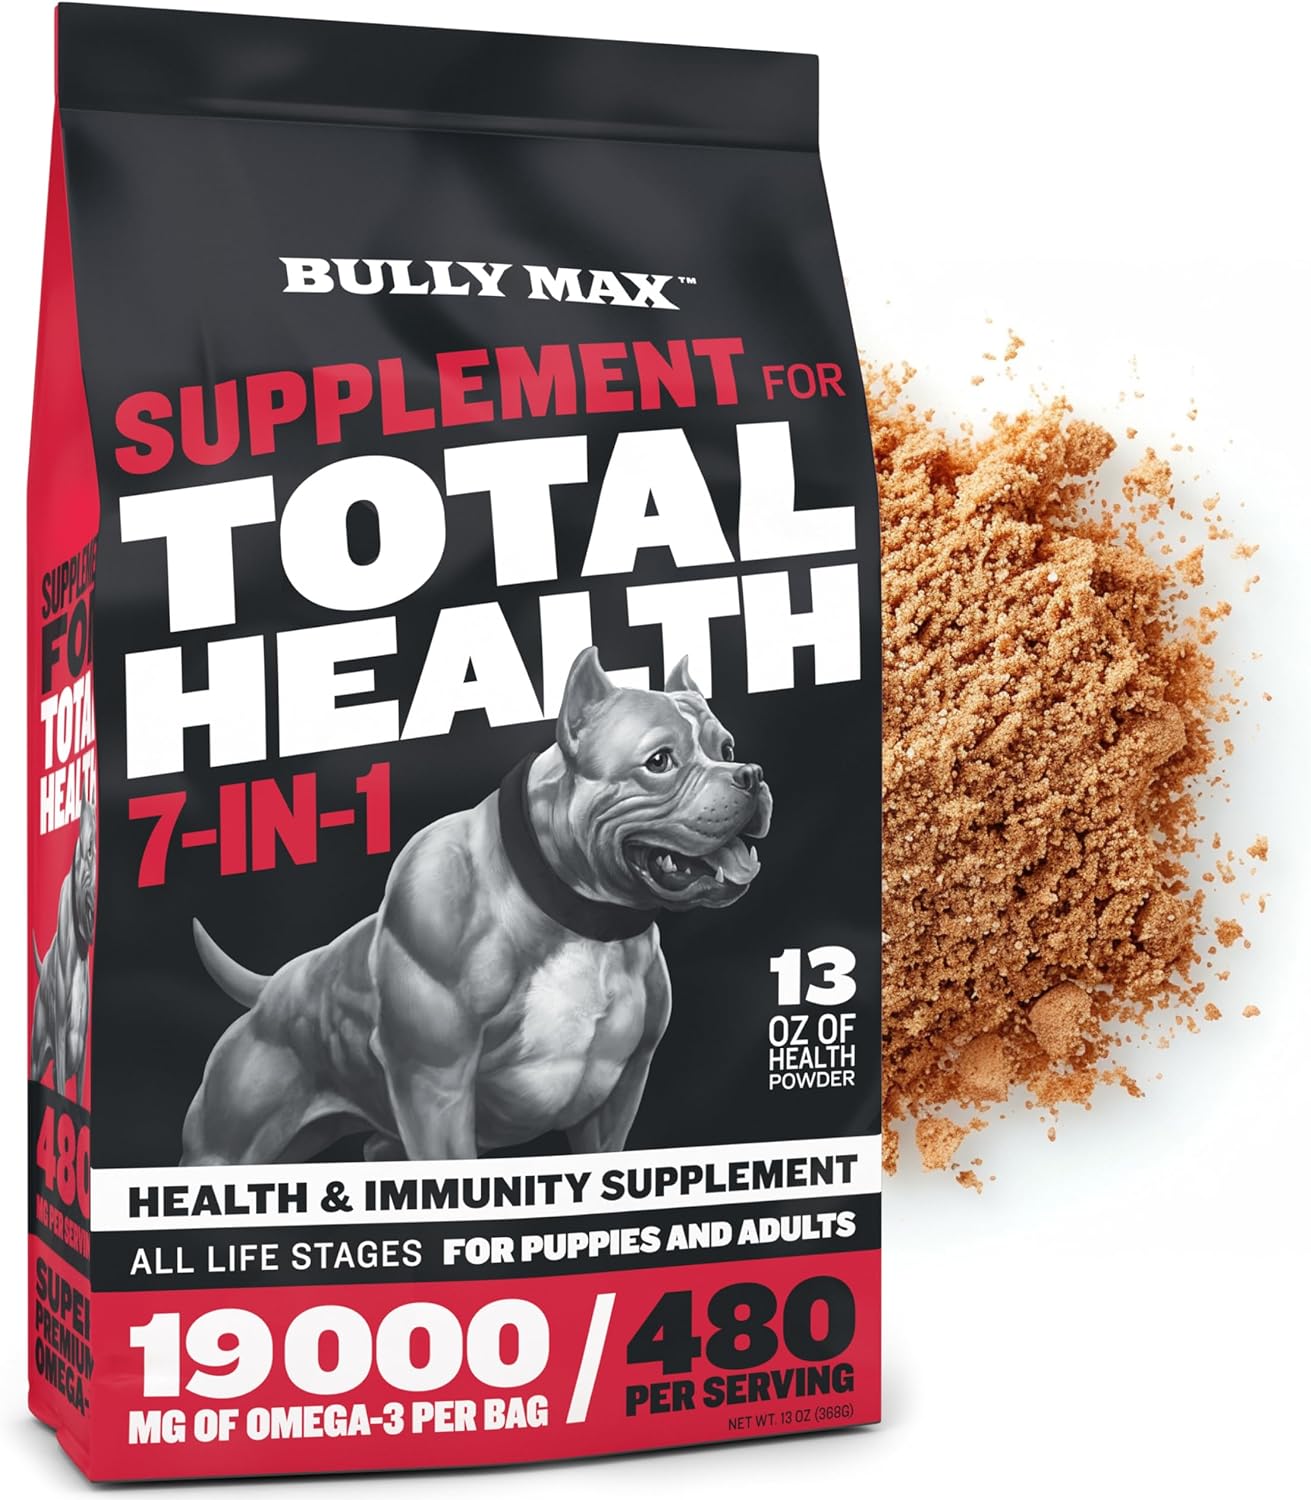 Bully Max 7-in-1 Total Health & Immunity Dog Multivitamin Powder - Puppy & Adult Dog Vitamins - Omega 3 Vitamin Supplements for Immune System, Heart, Joint & Digestive Health for All Breeds, 368g Bag